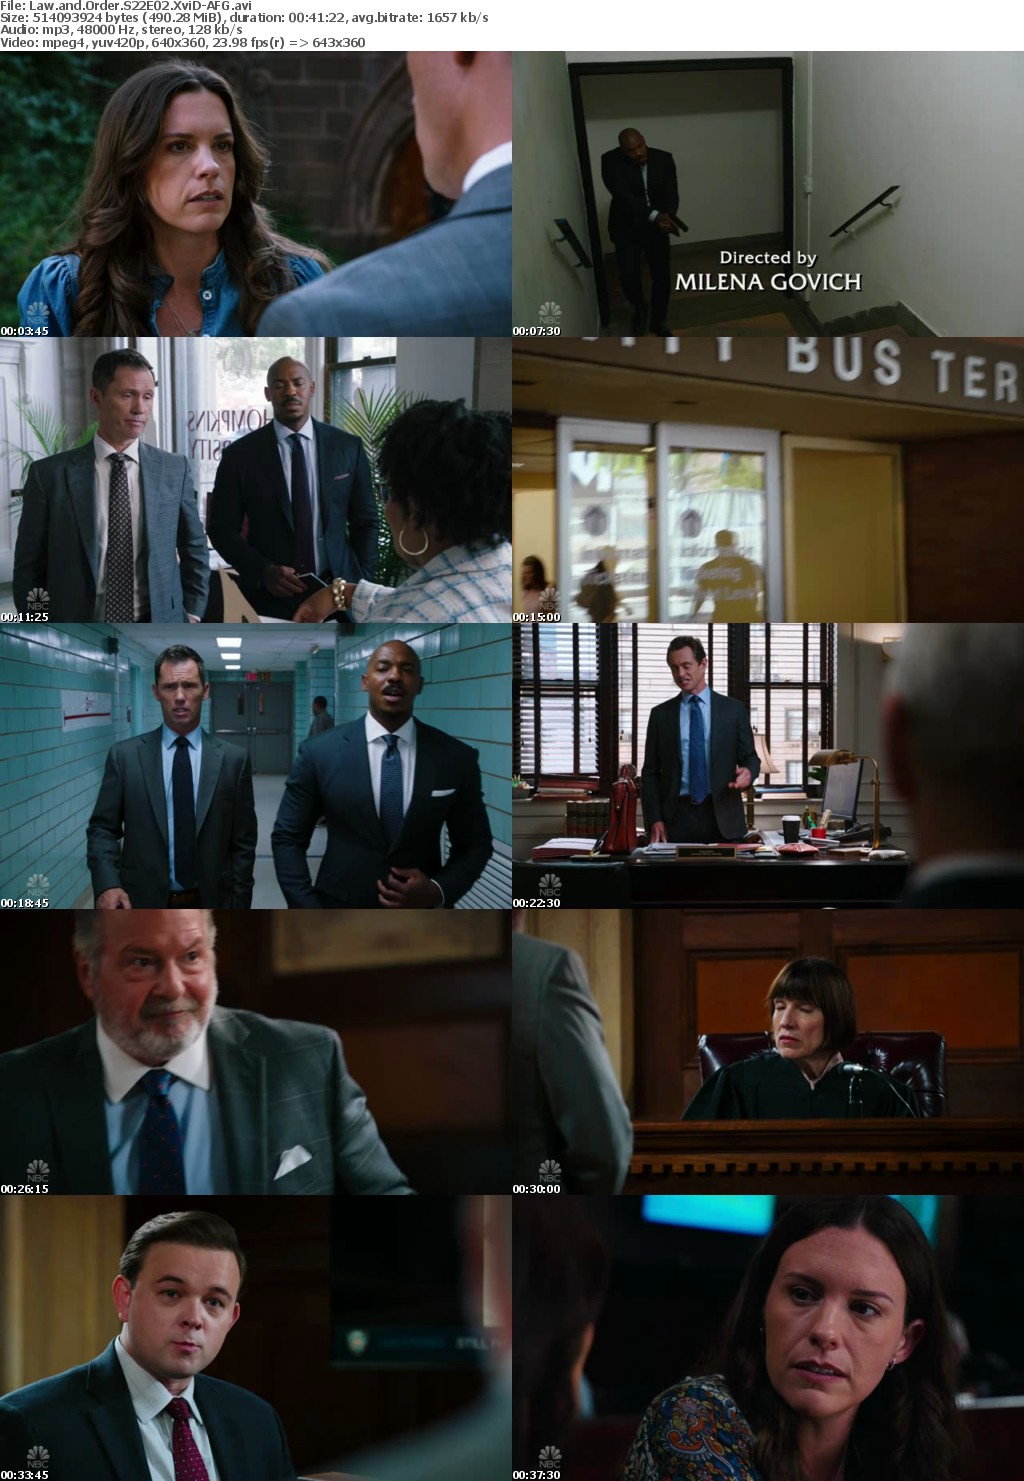 Law and Order S22E02 XviD-AFG